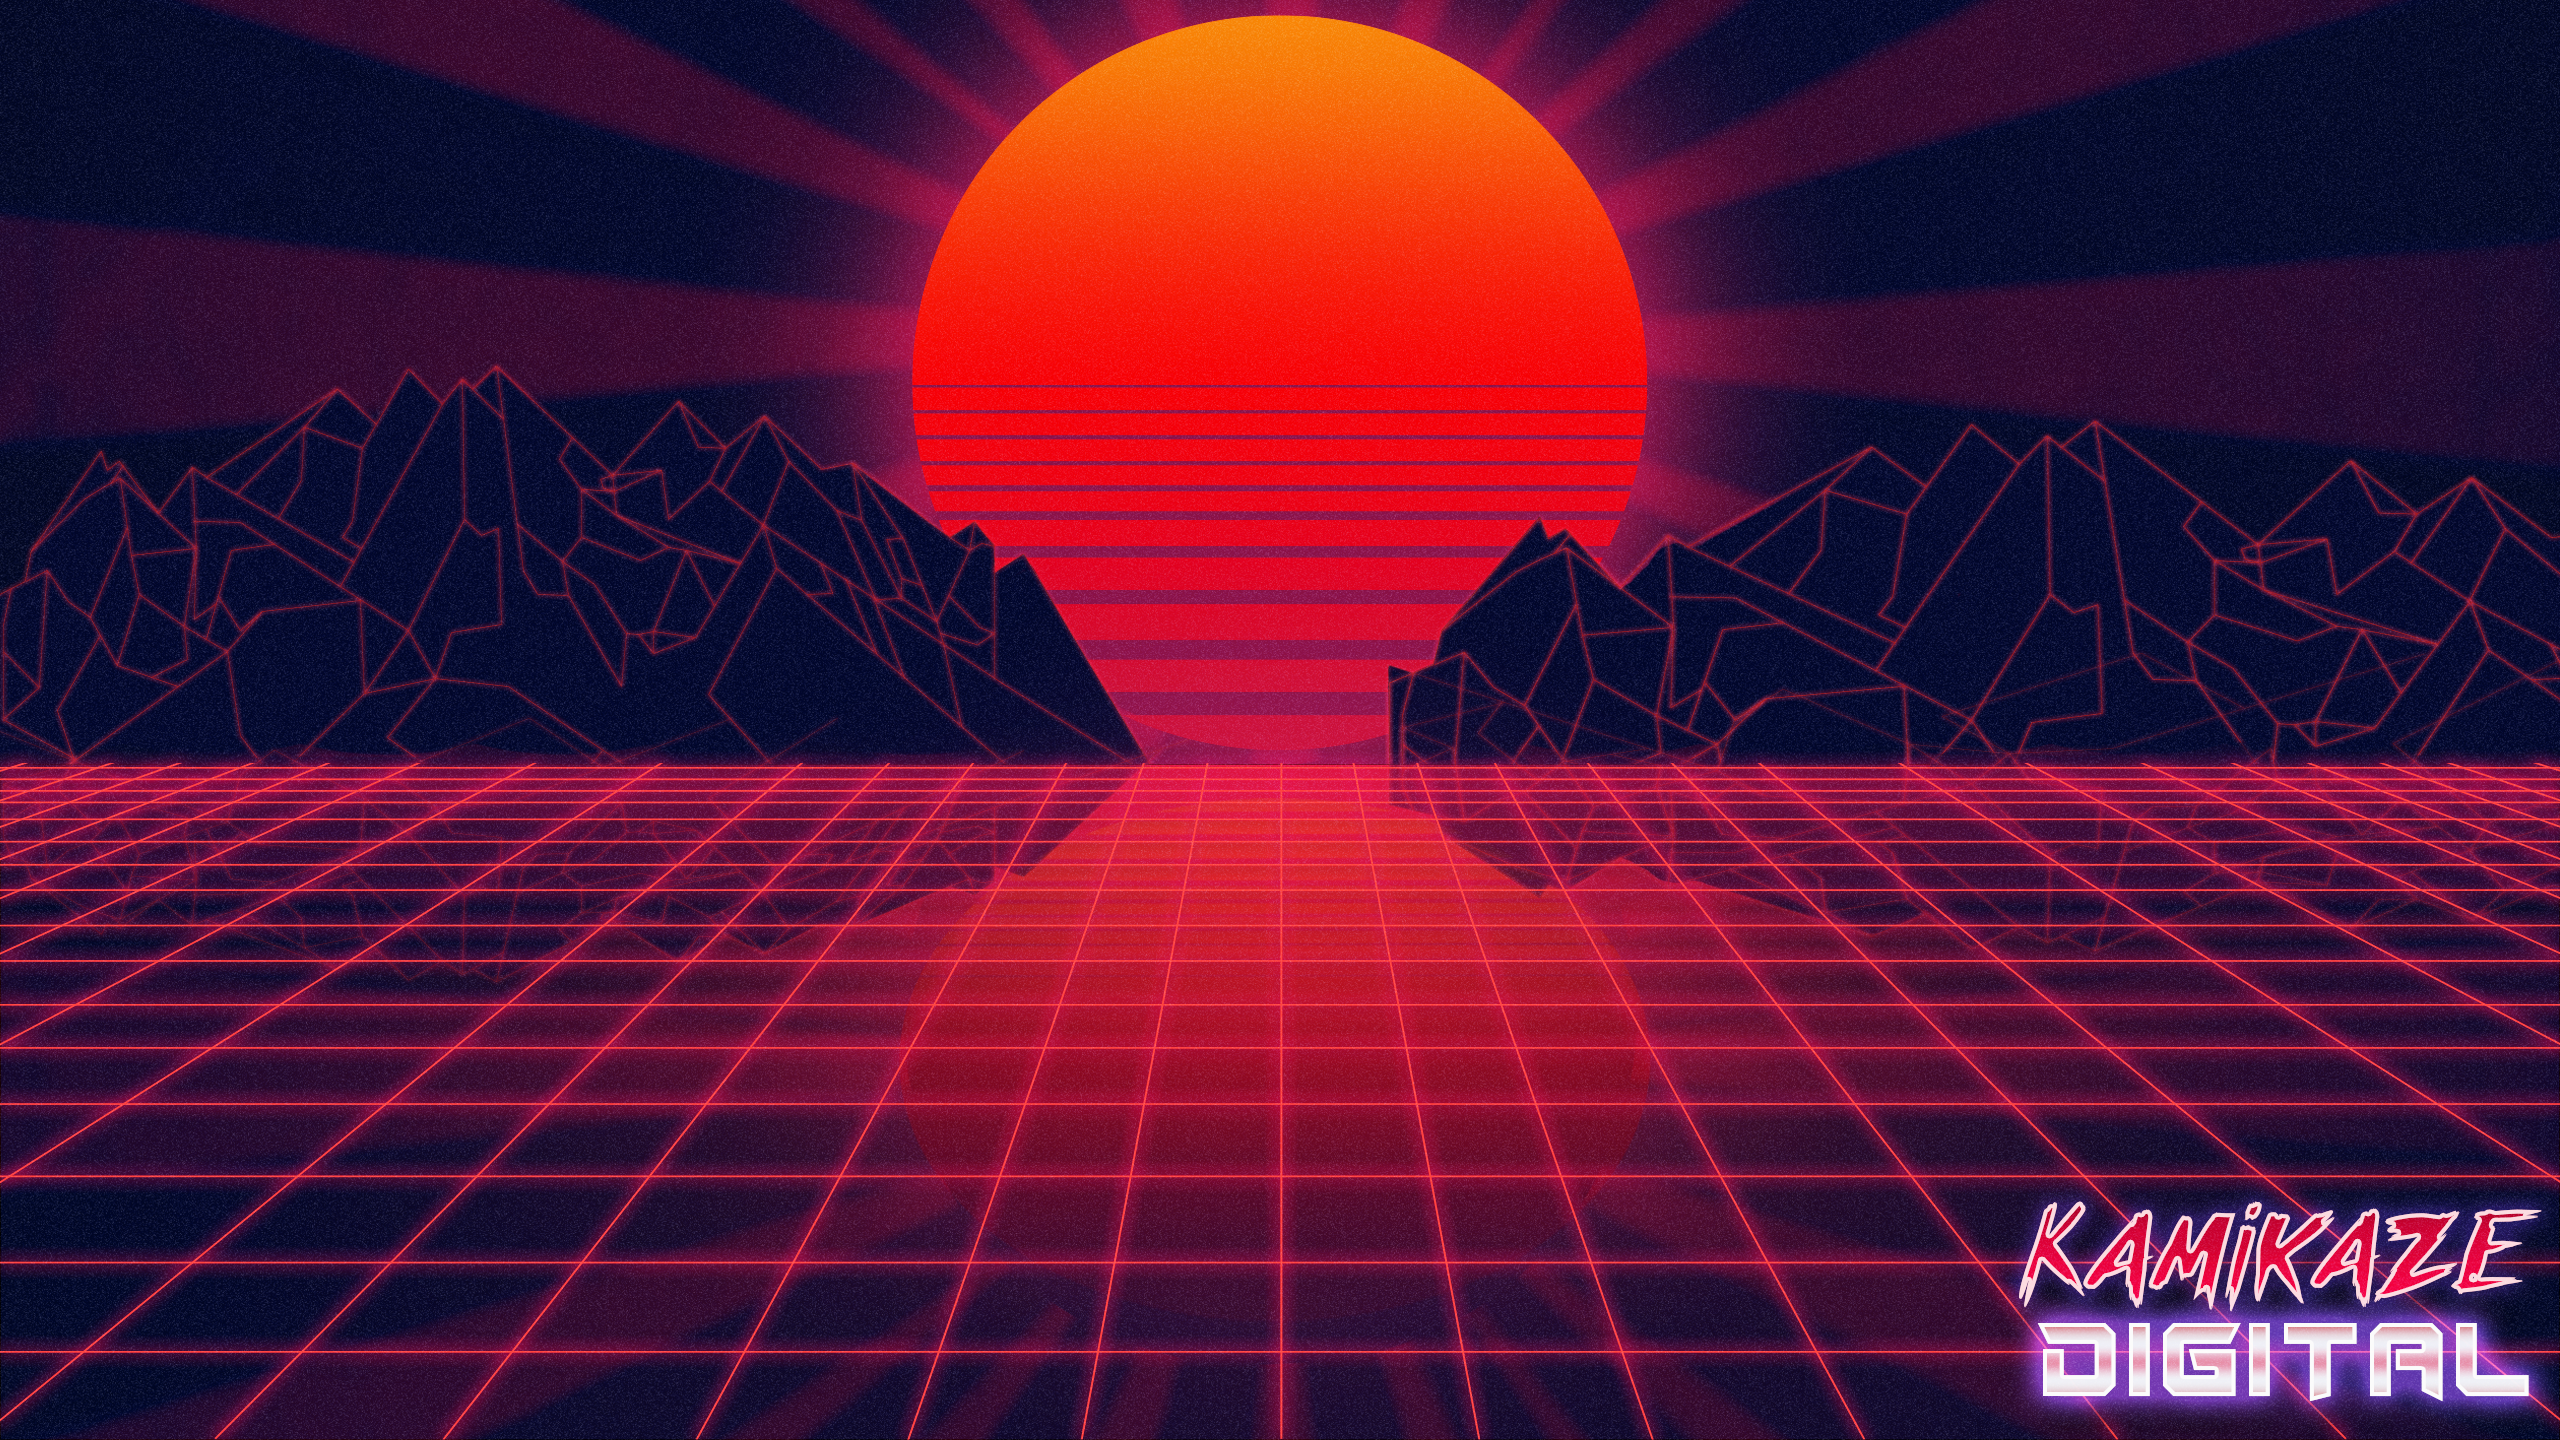 Finalized My Outrun Style For Pany Wanted To Post It Here